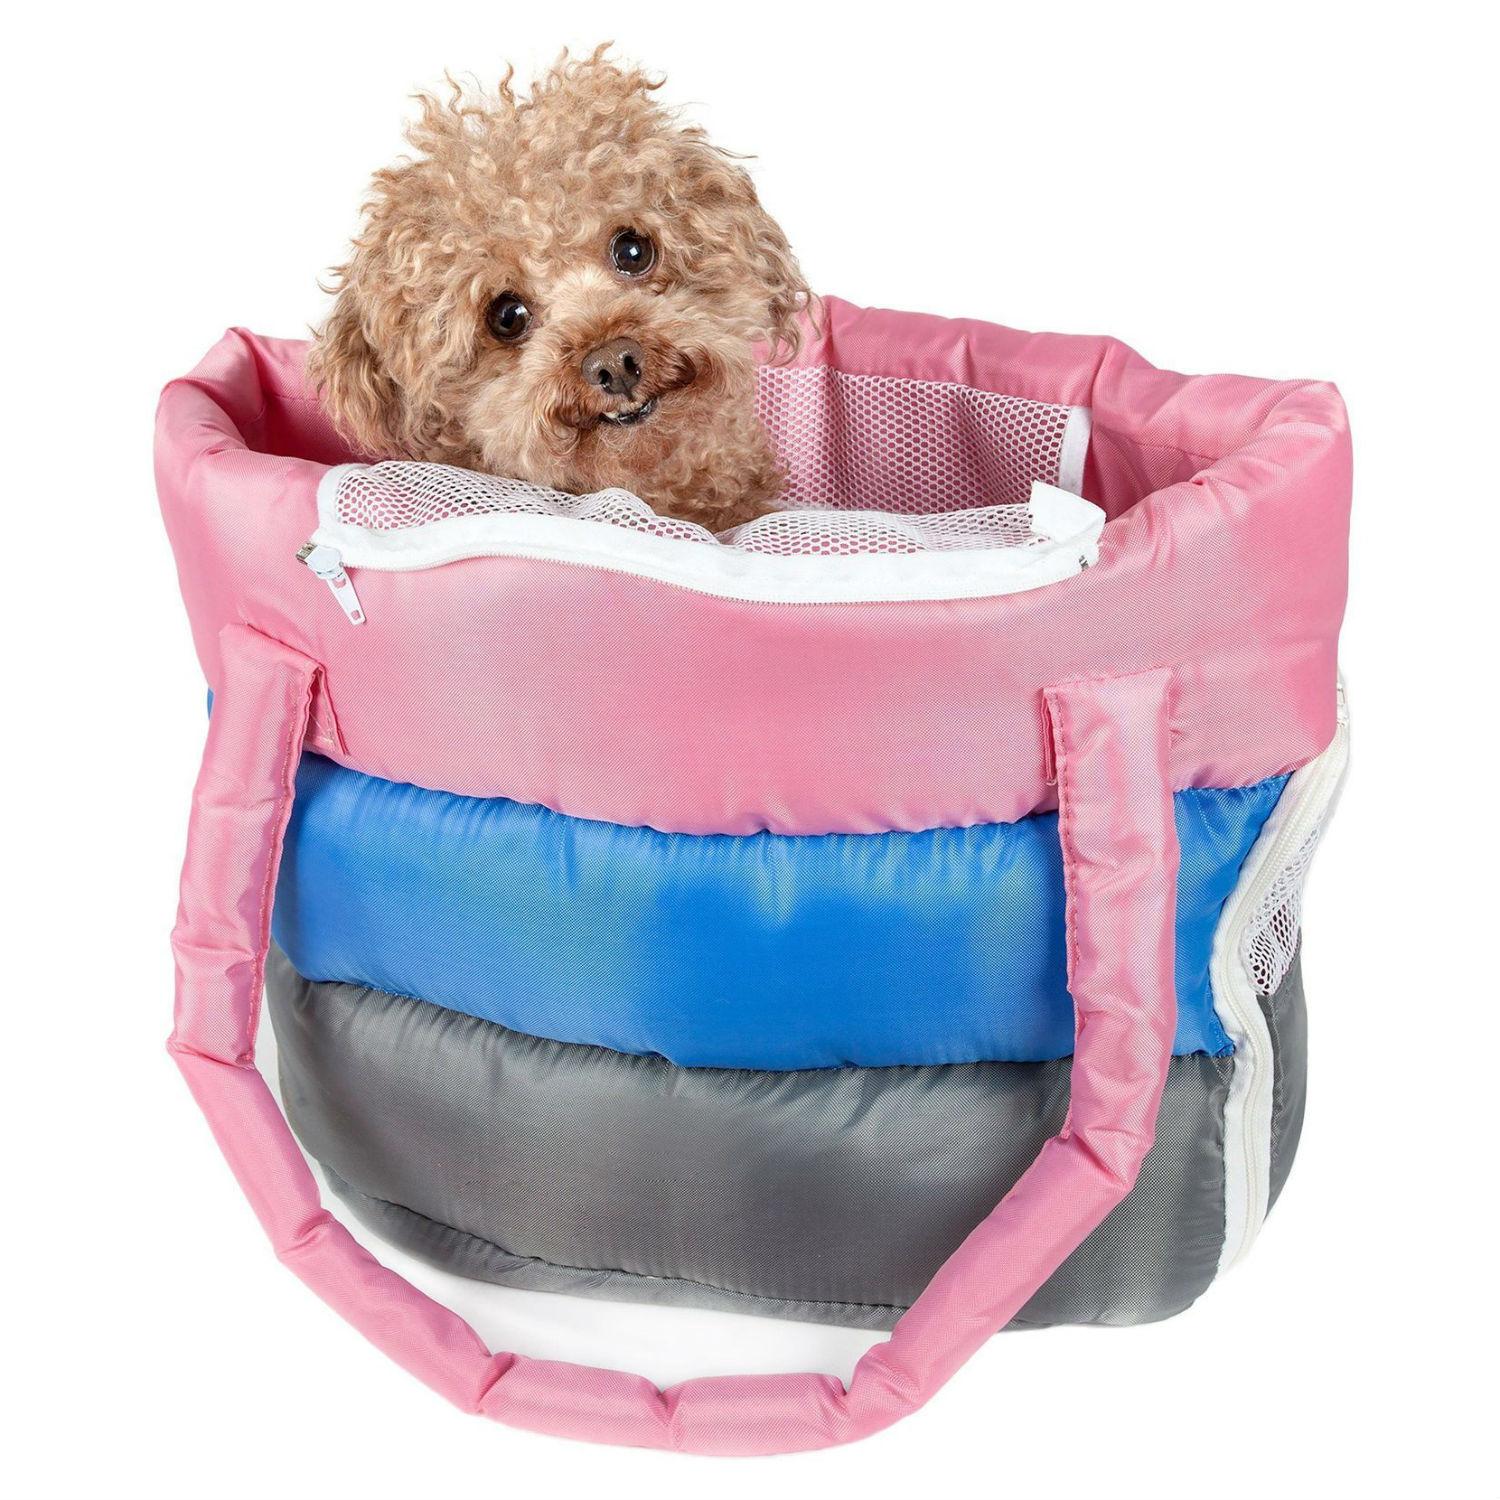 Pet Life Bubble-Poly Tri-Colored Insulated Pet Carrier - Pink, Blue and Gray